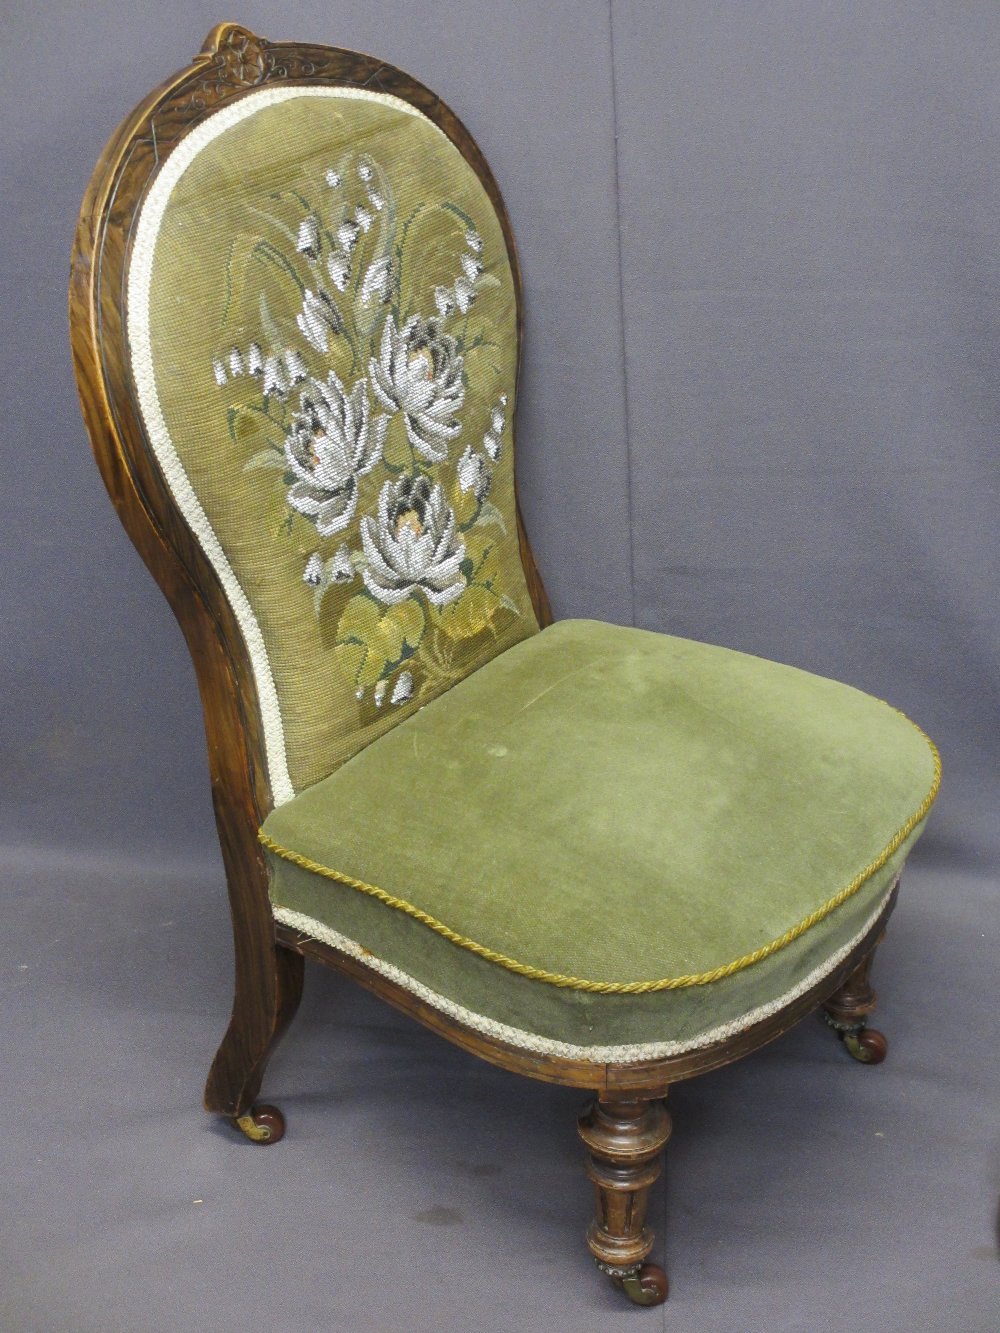 CIRCA 1900 ROSEWOOD EFFECT SPOONBACK PARLOUR CHAIR and two circular foot stools, all having beadwork - Image 2 of 5